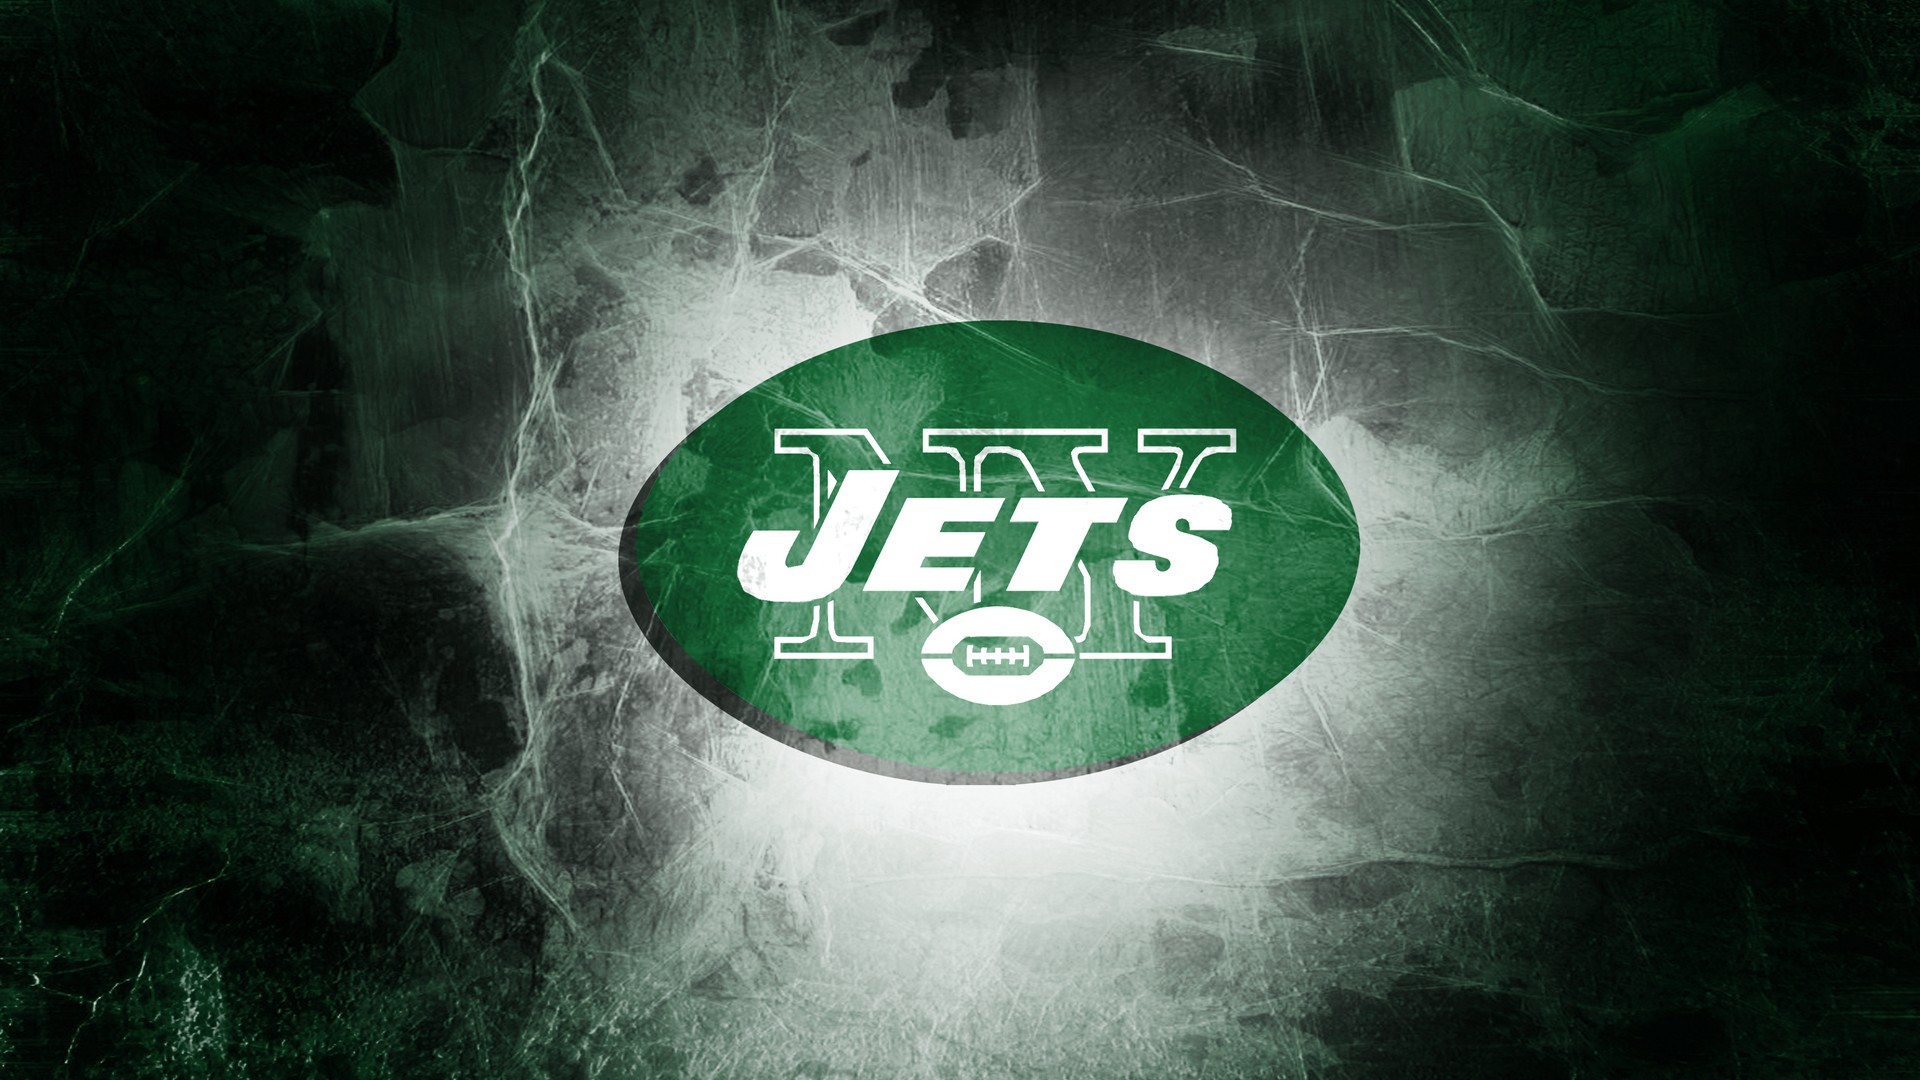 New York Jets Backgrounds HD With Resolution 1920X1080 pixel. You can make this wallpaper for your Mac or Windows Desktop Background, iPhone, Android or Tablet and another Smartphone device for free